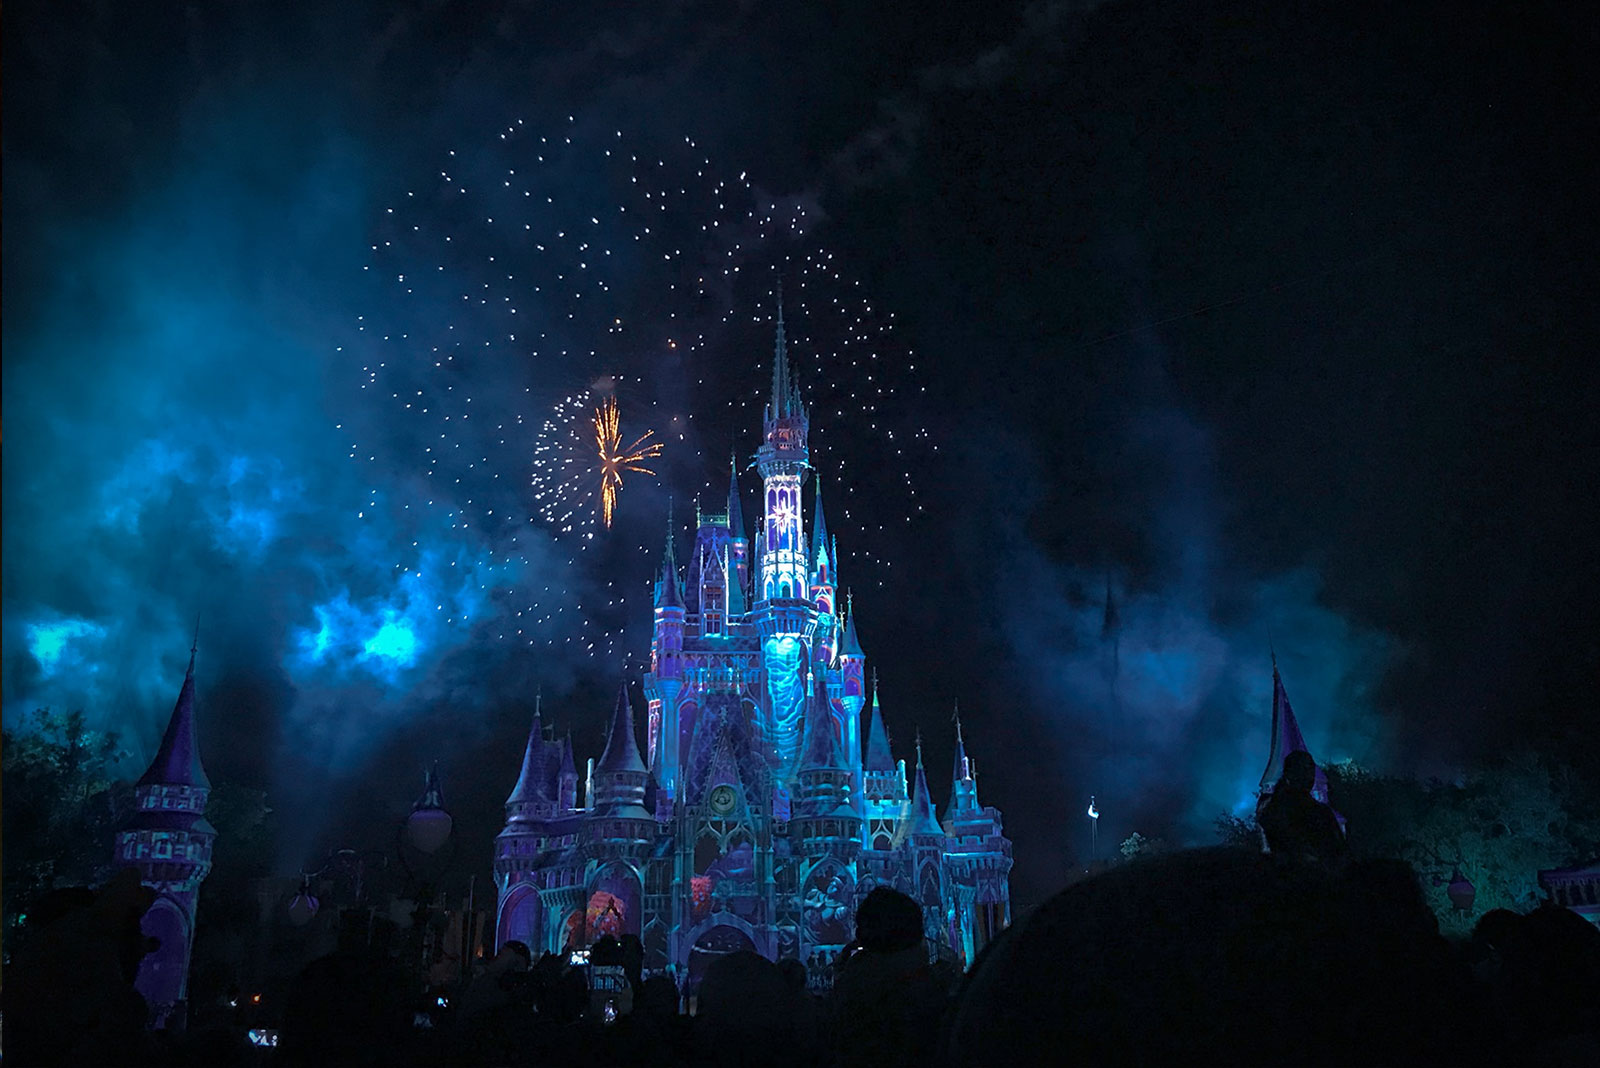 Disney castle at night with fireworks in sky.